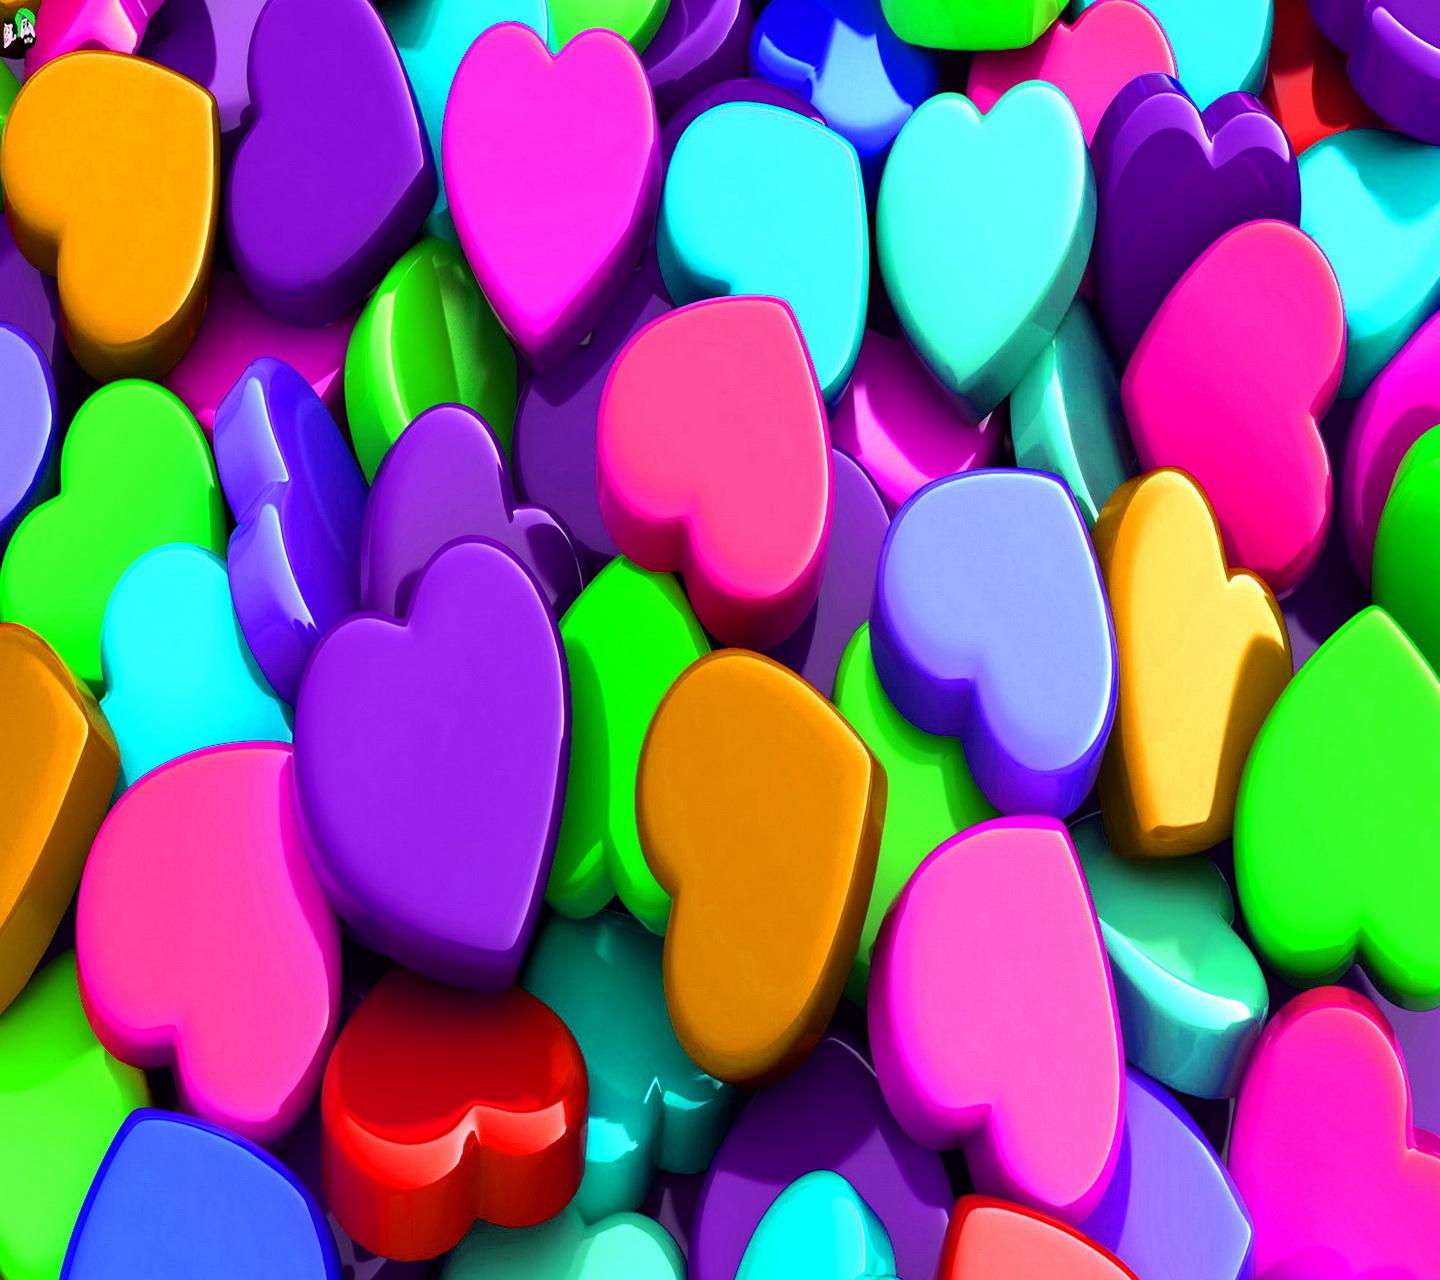 Download Colorful hearts hd wallpaper - Heart and rose hd wallpaper for  your mobile cell phone